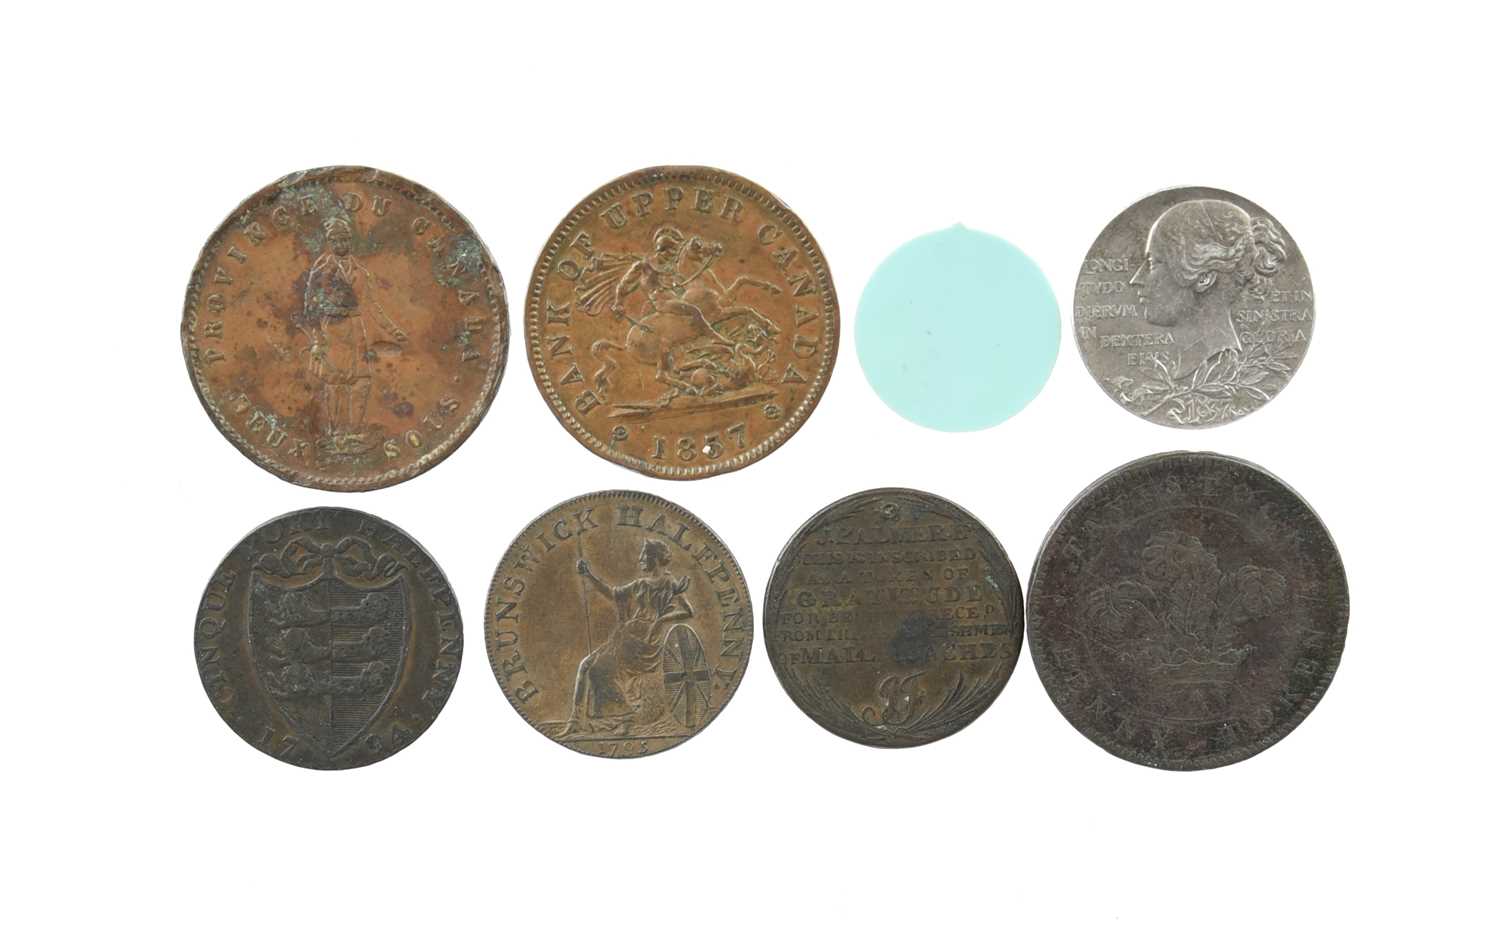 A small quantity of token currency and associated items, including: J. Kilvington, Brunswick - Image 2 of 2